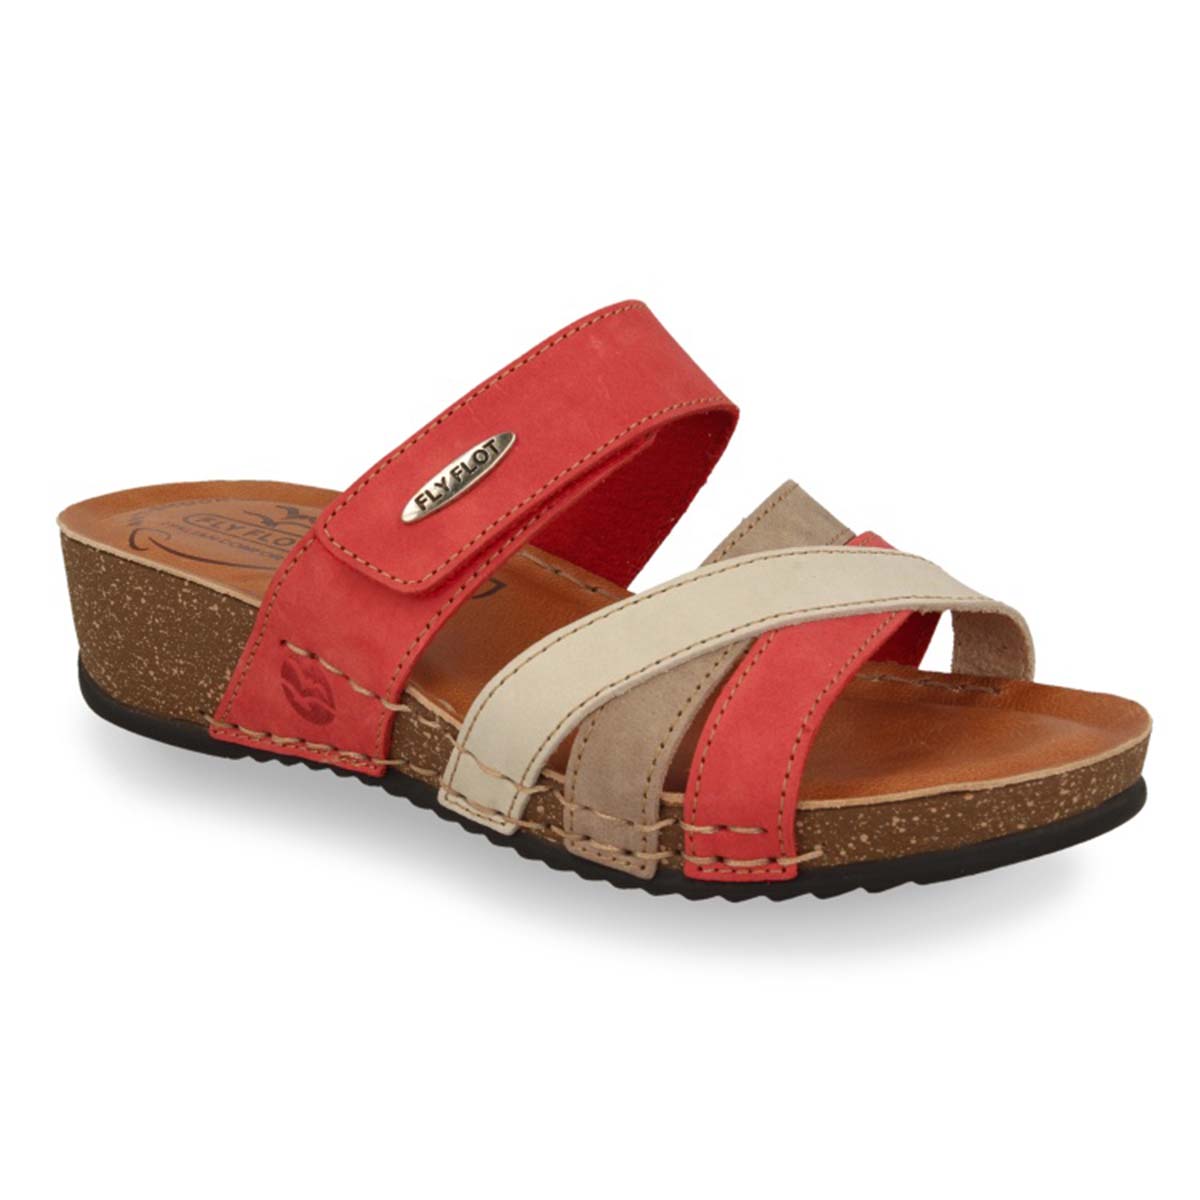 See the Velcro Leather Slide Women Sandals With Anti-Shock Cushioned Leather Insole in the colour BLUE, available in various sizes